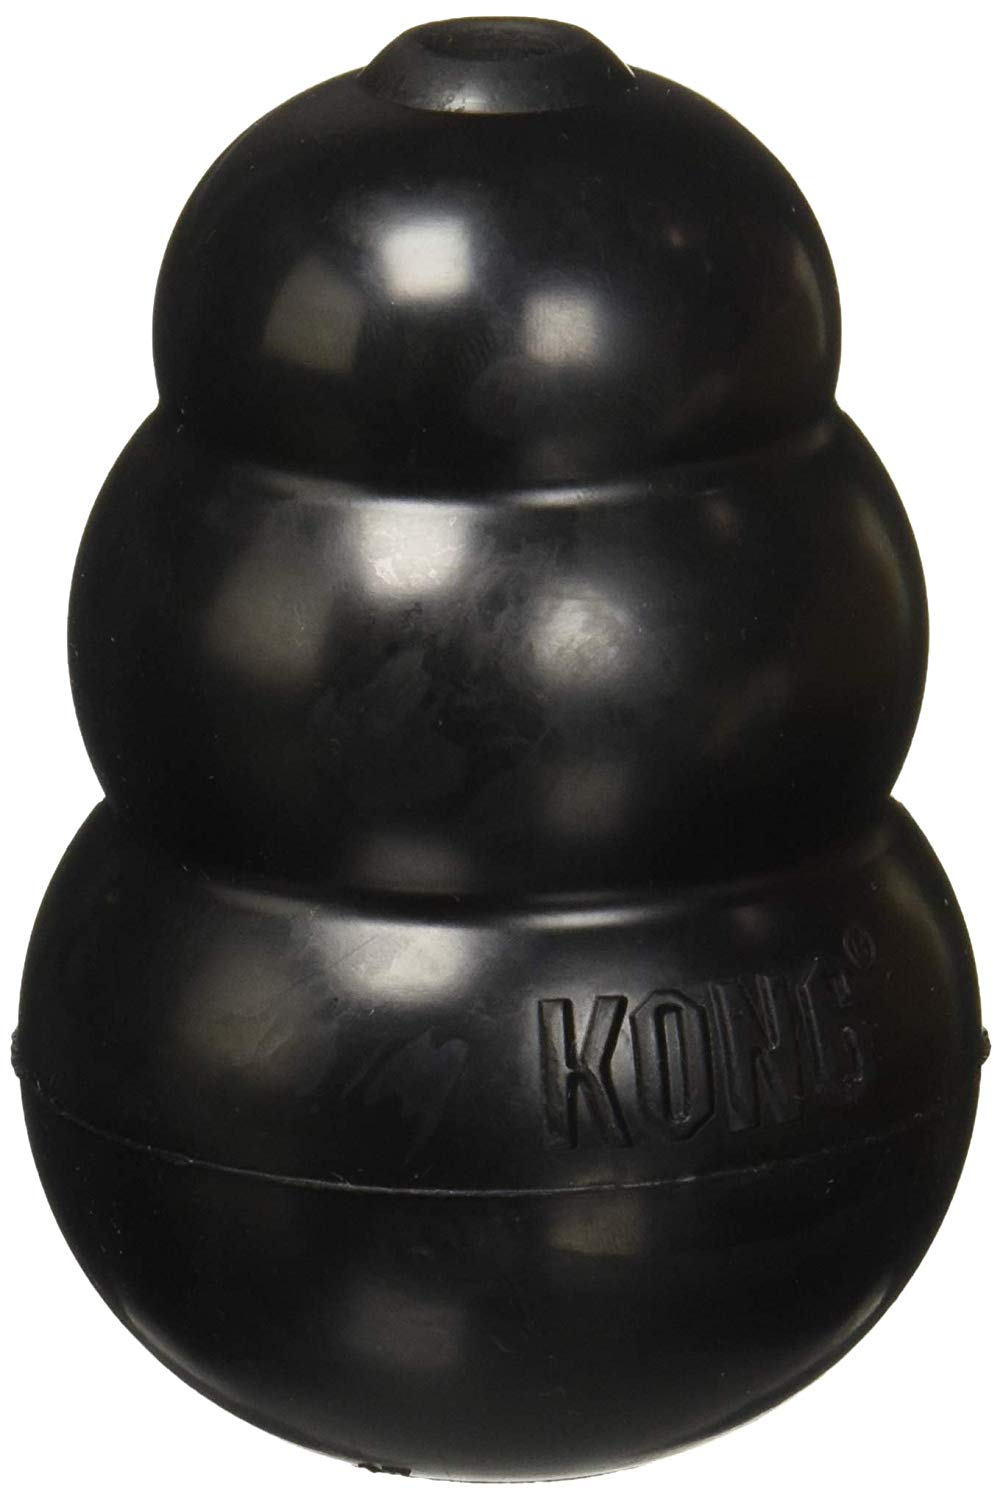 The KONG Extreme dog toy